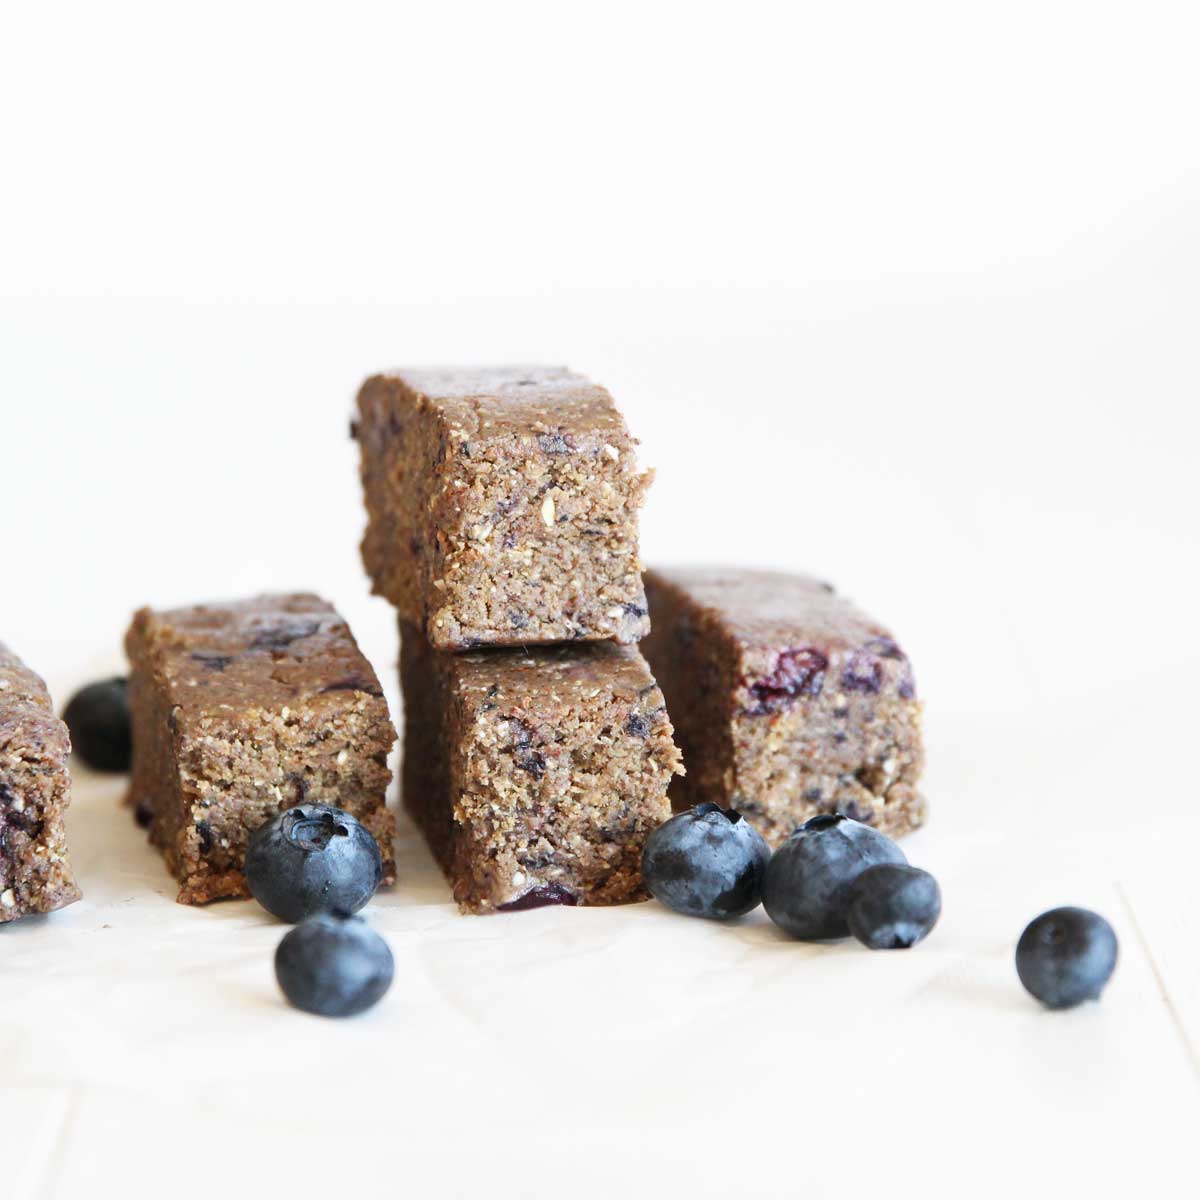 Homemade Blueberry Oatmeal Protein Bars (Healthy, Wholesome Vegan Recipe!) - Roasted Corn Naan